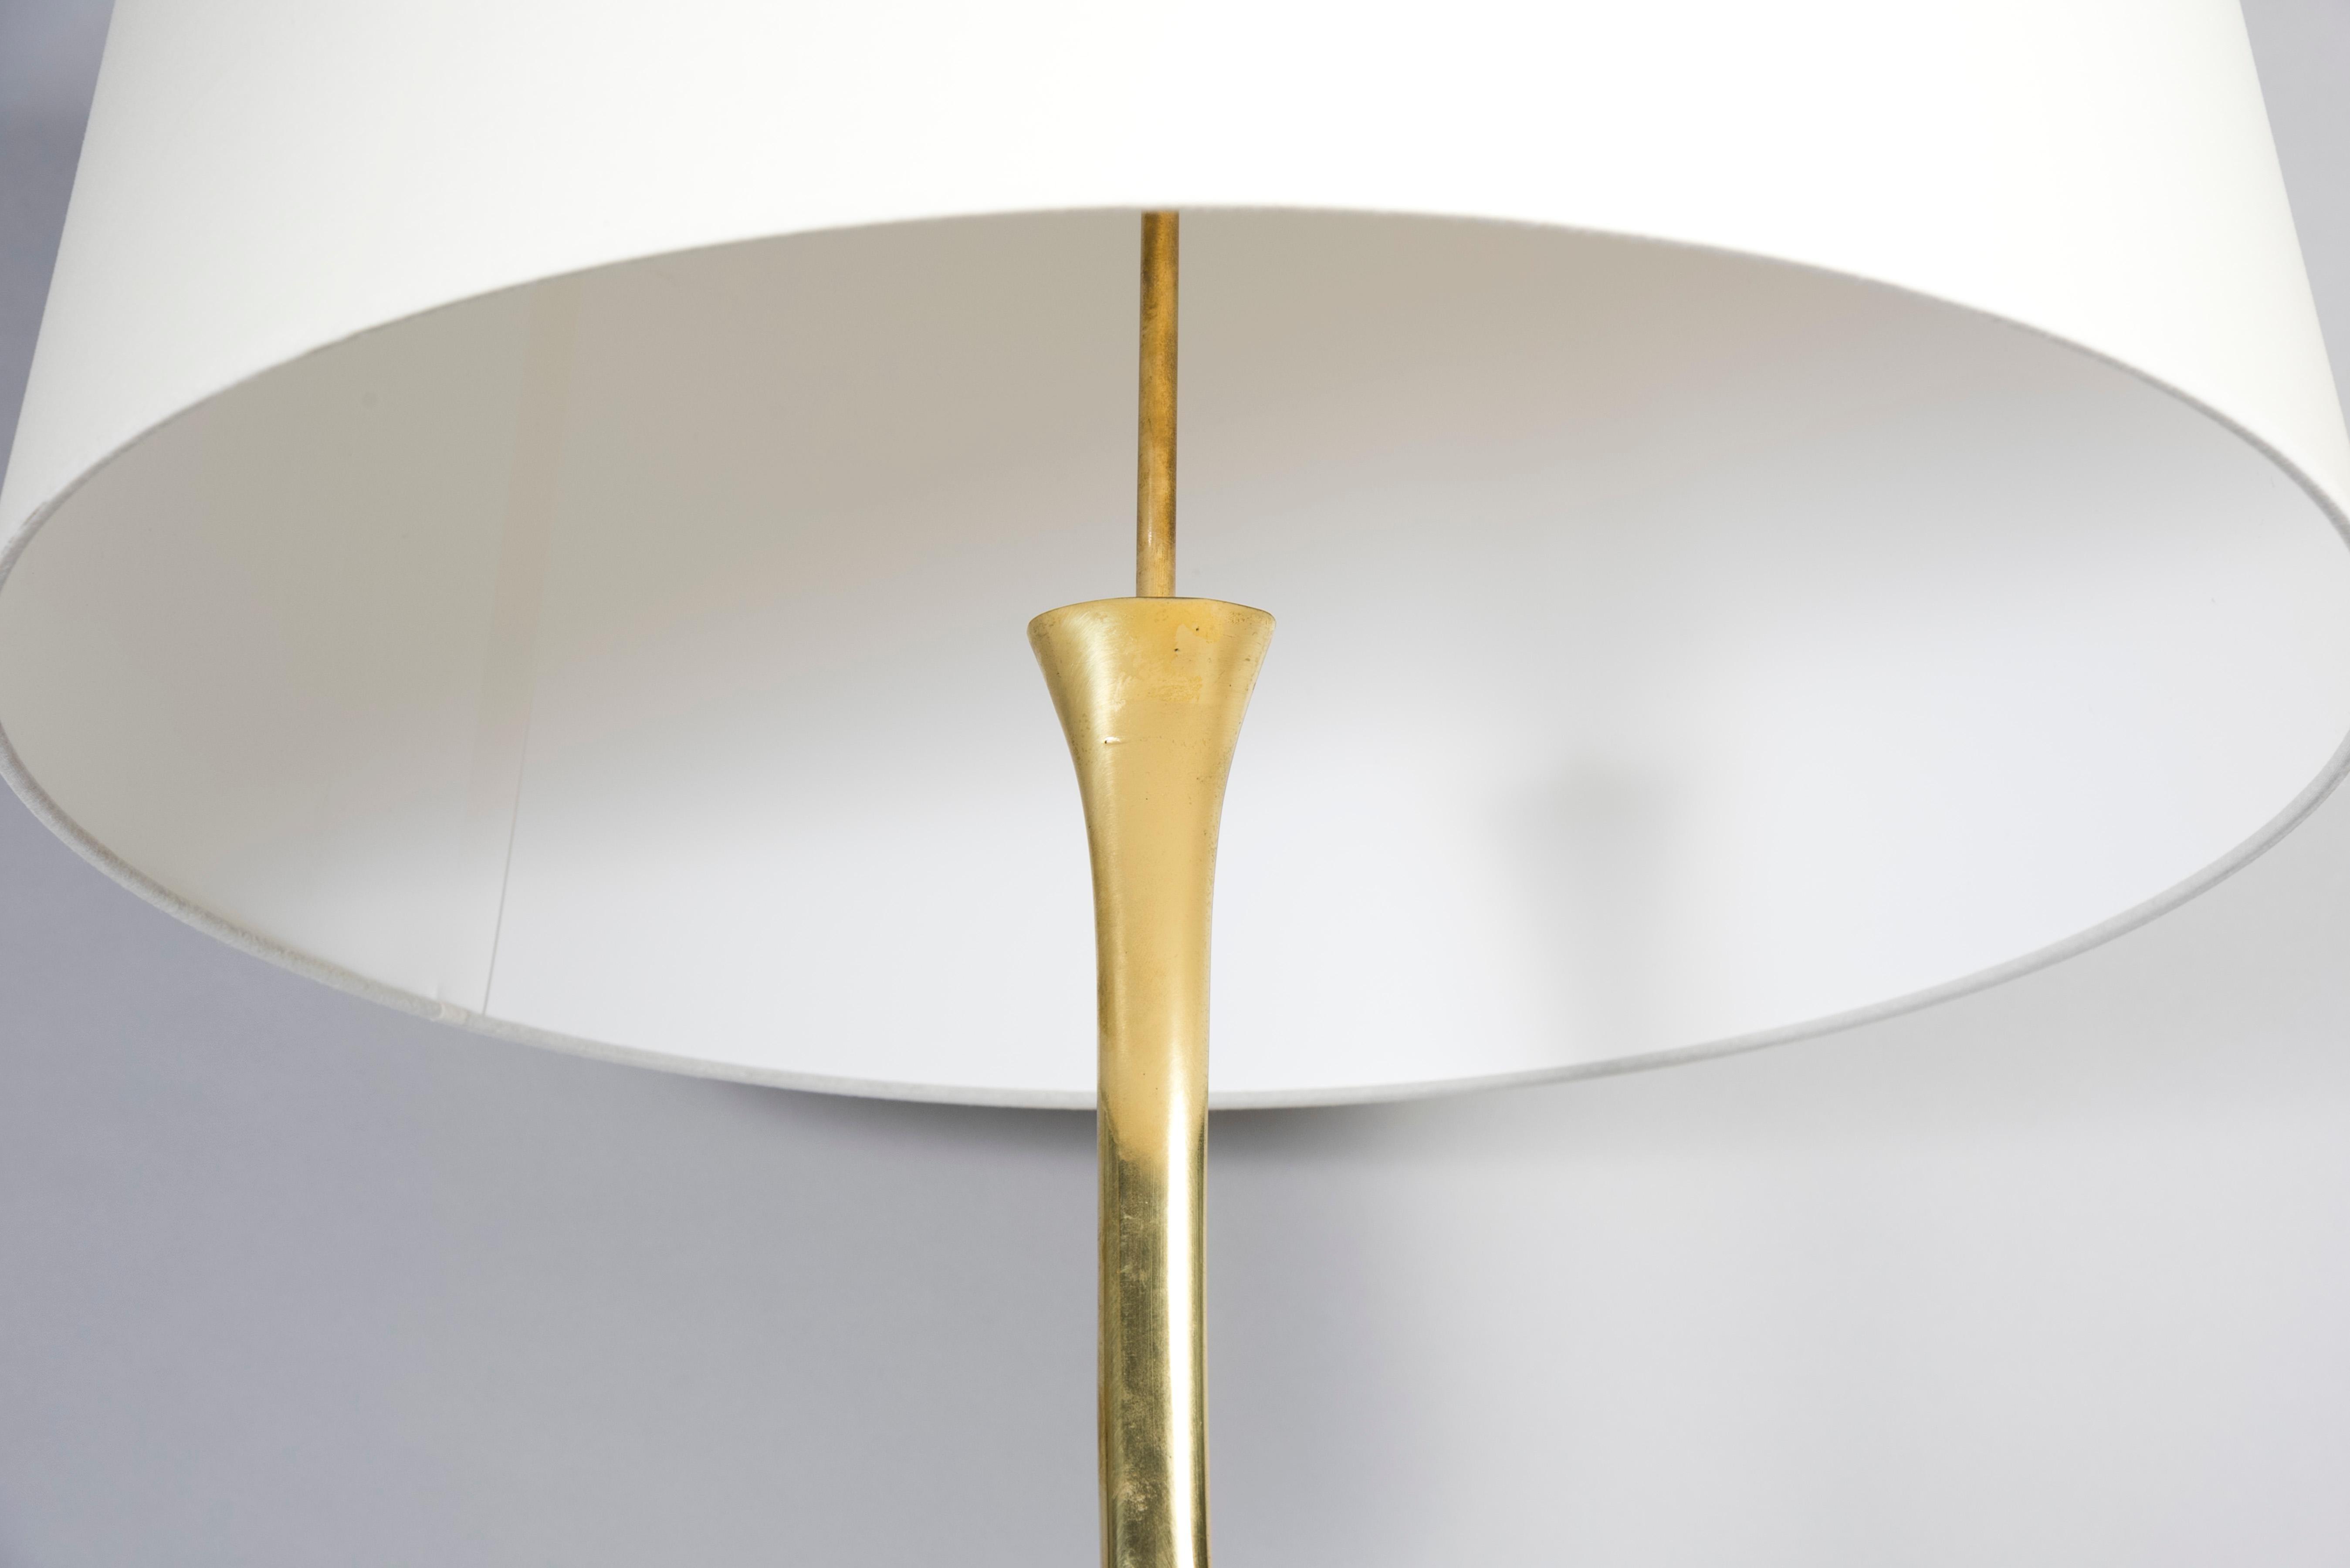 Late 20th Century 1970's Brass and Quartz Floor Lamp Signed by Willy Daro For Sale